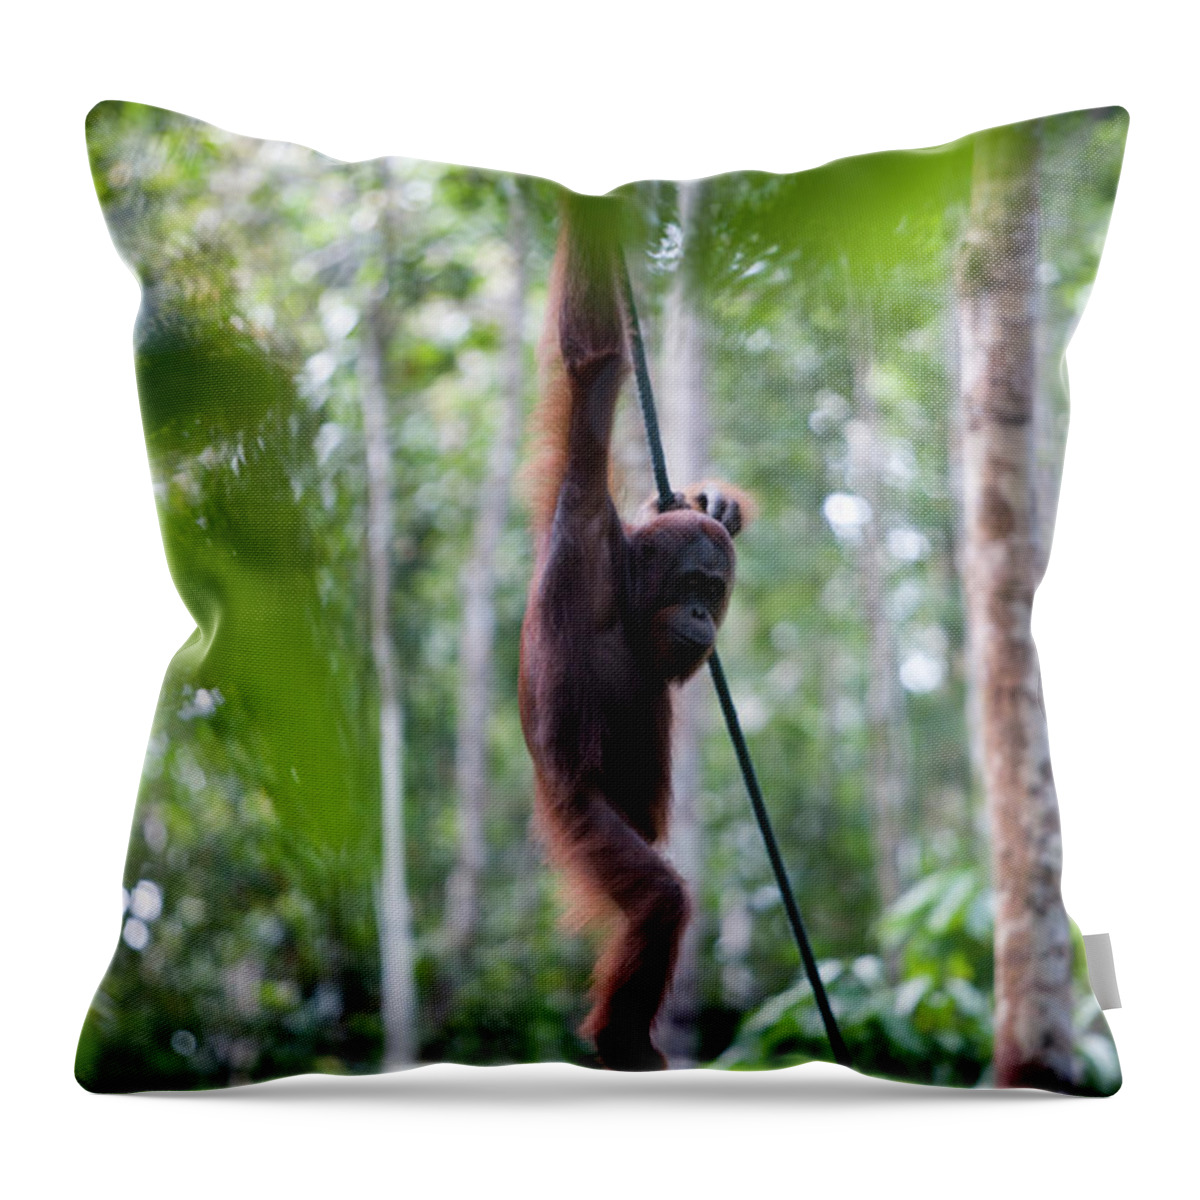 Island Of Borneo Throw Pillow featuring the photograph Orang-utan Ritchie In Semongoh Wildlife by Holger Leue